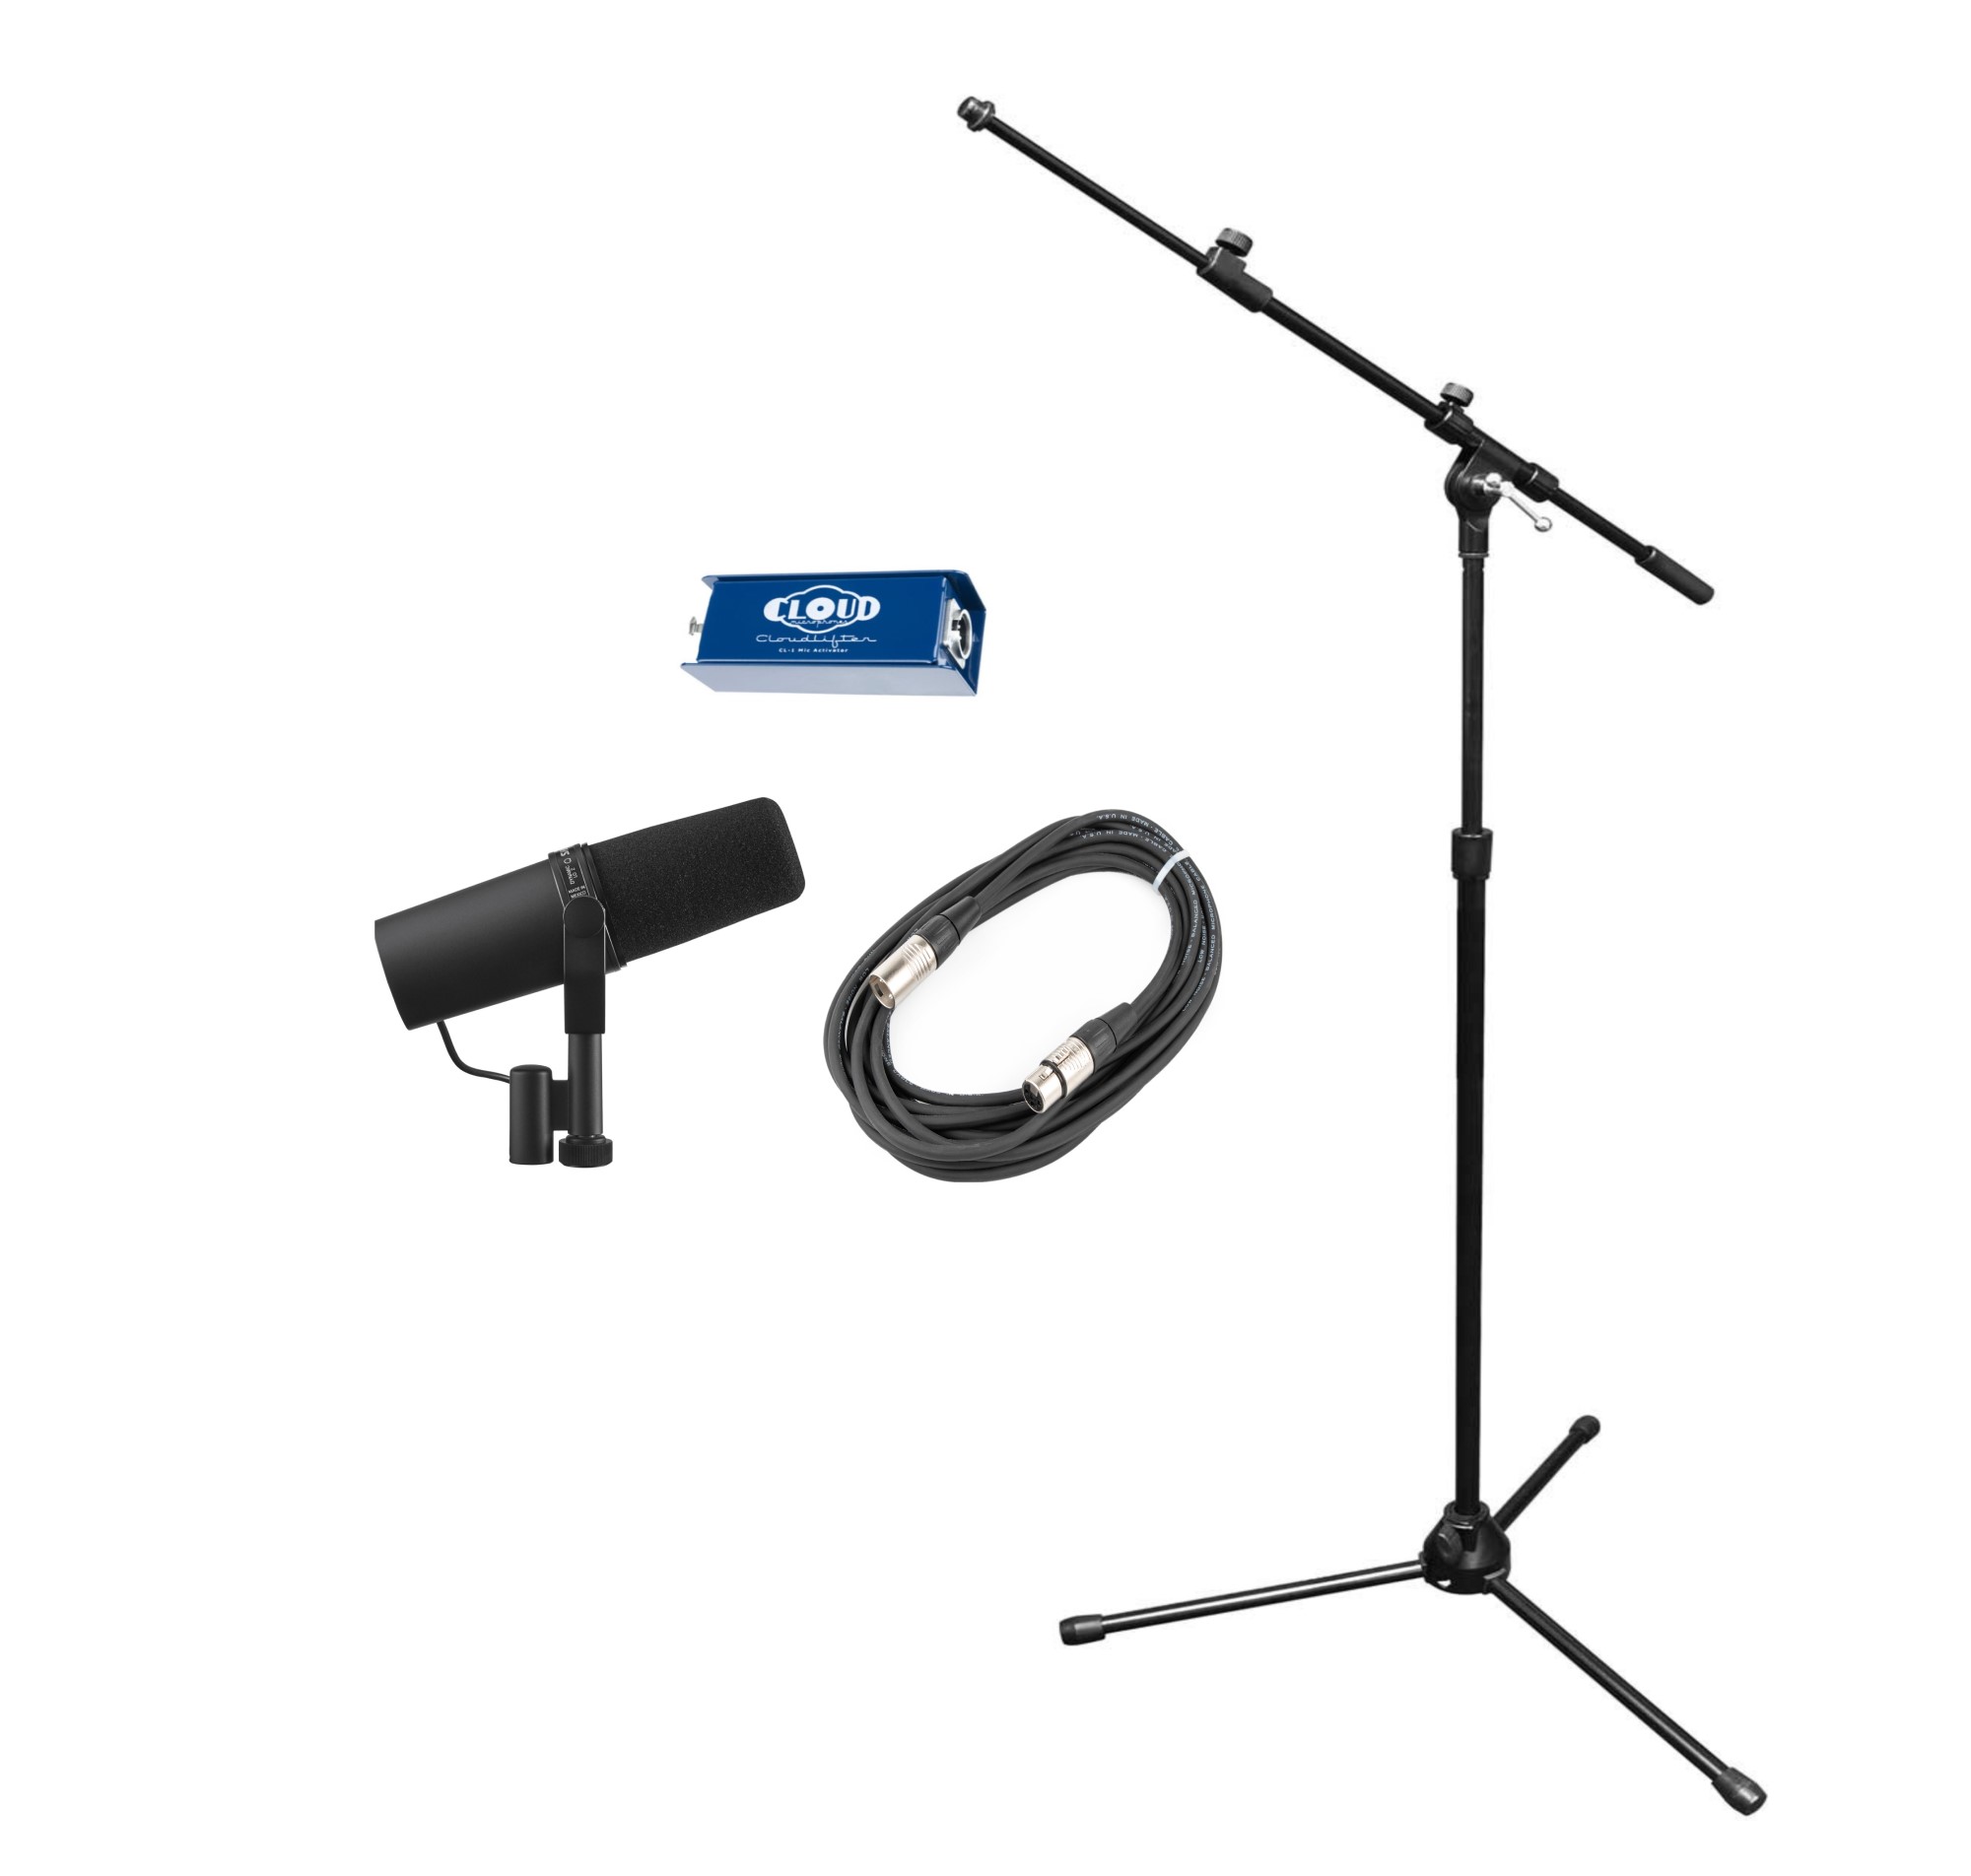 Shure SM7B Cardioid Dynamic Microphone with Desk Stand Kit